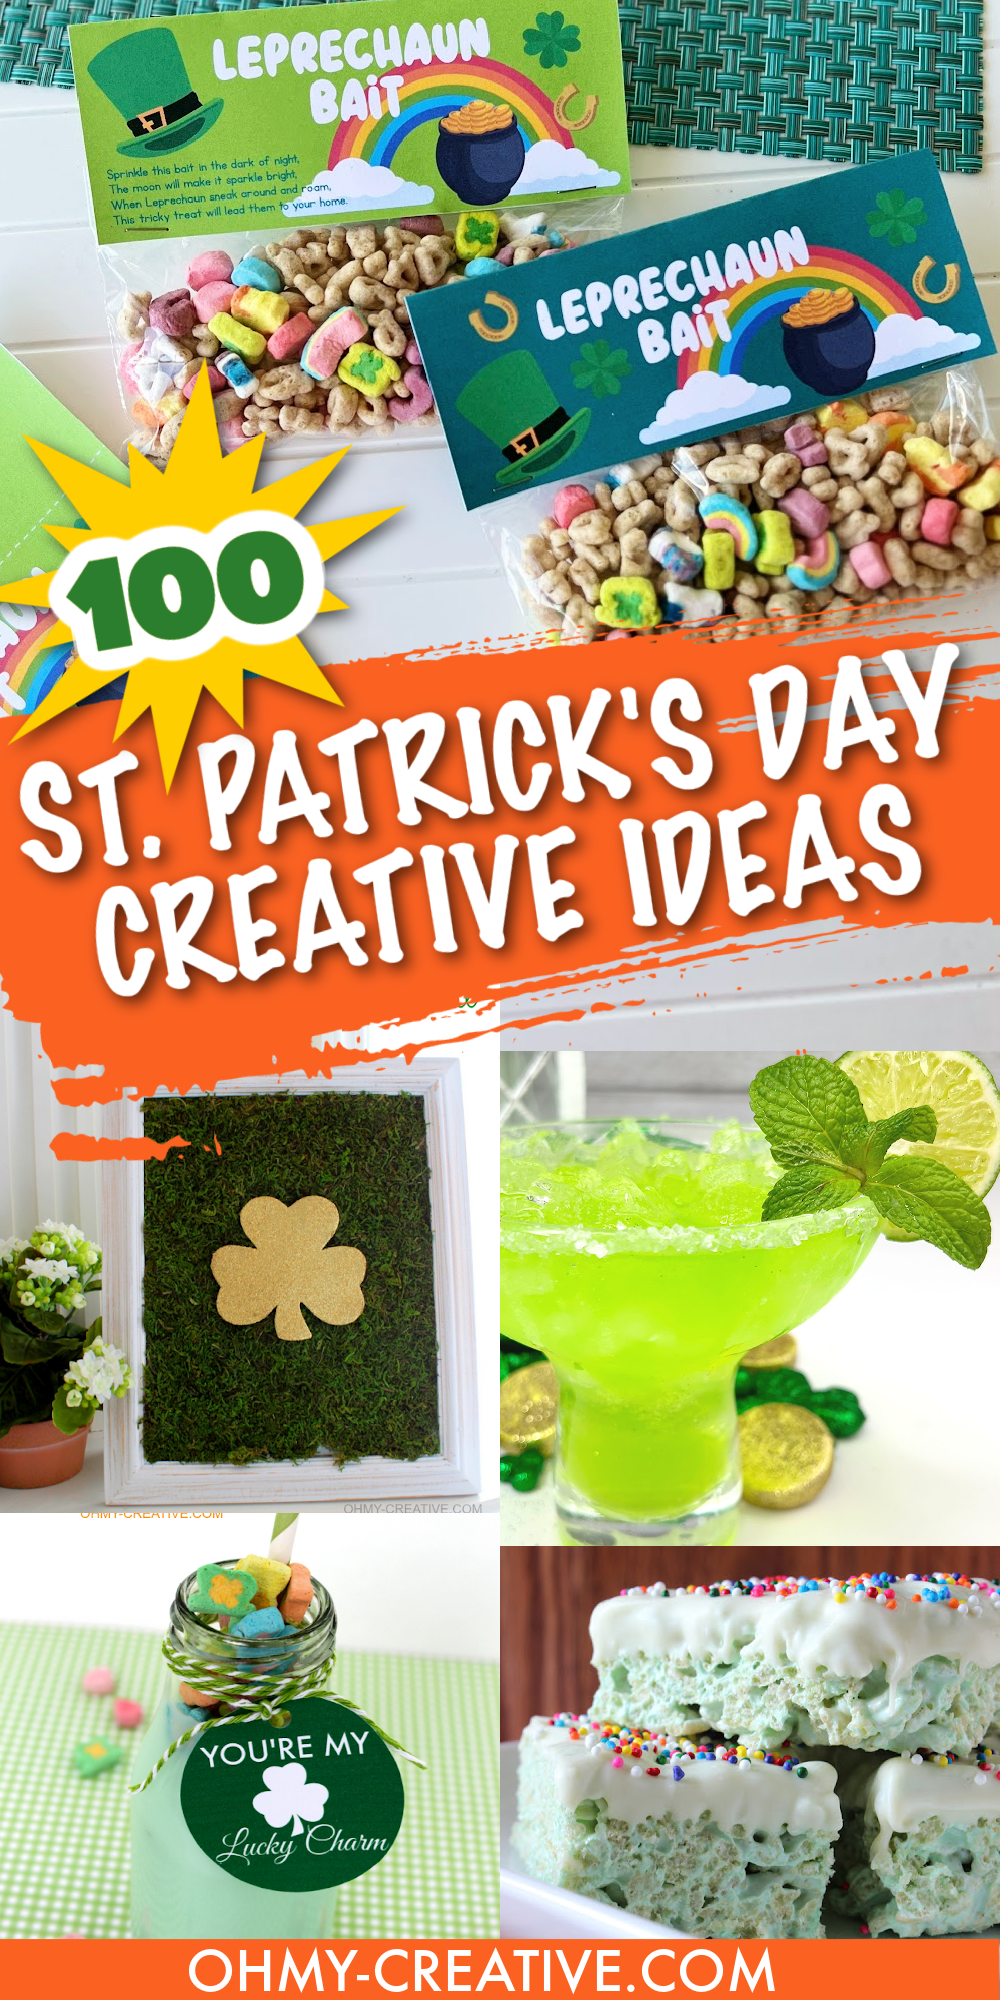 A pin image collage of St. Patrick's Day ideas including crafts, recipes, printables to celebrate the holiday.